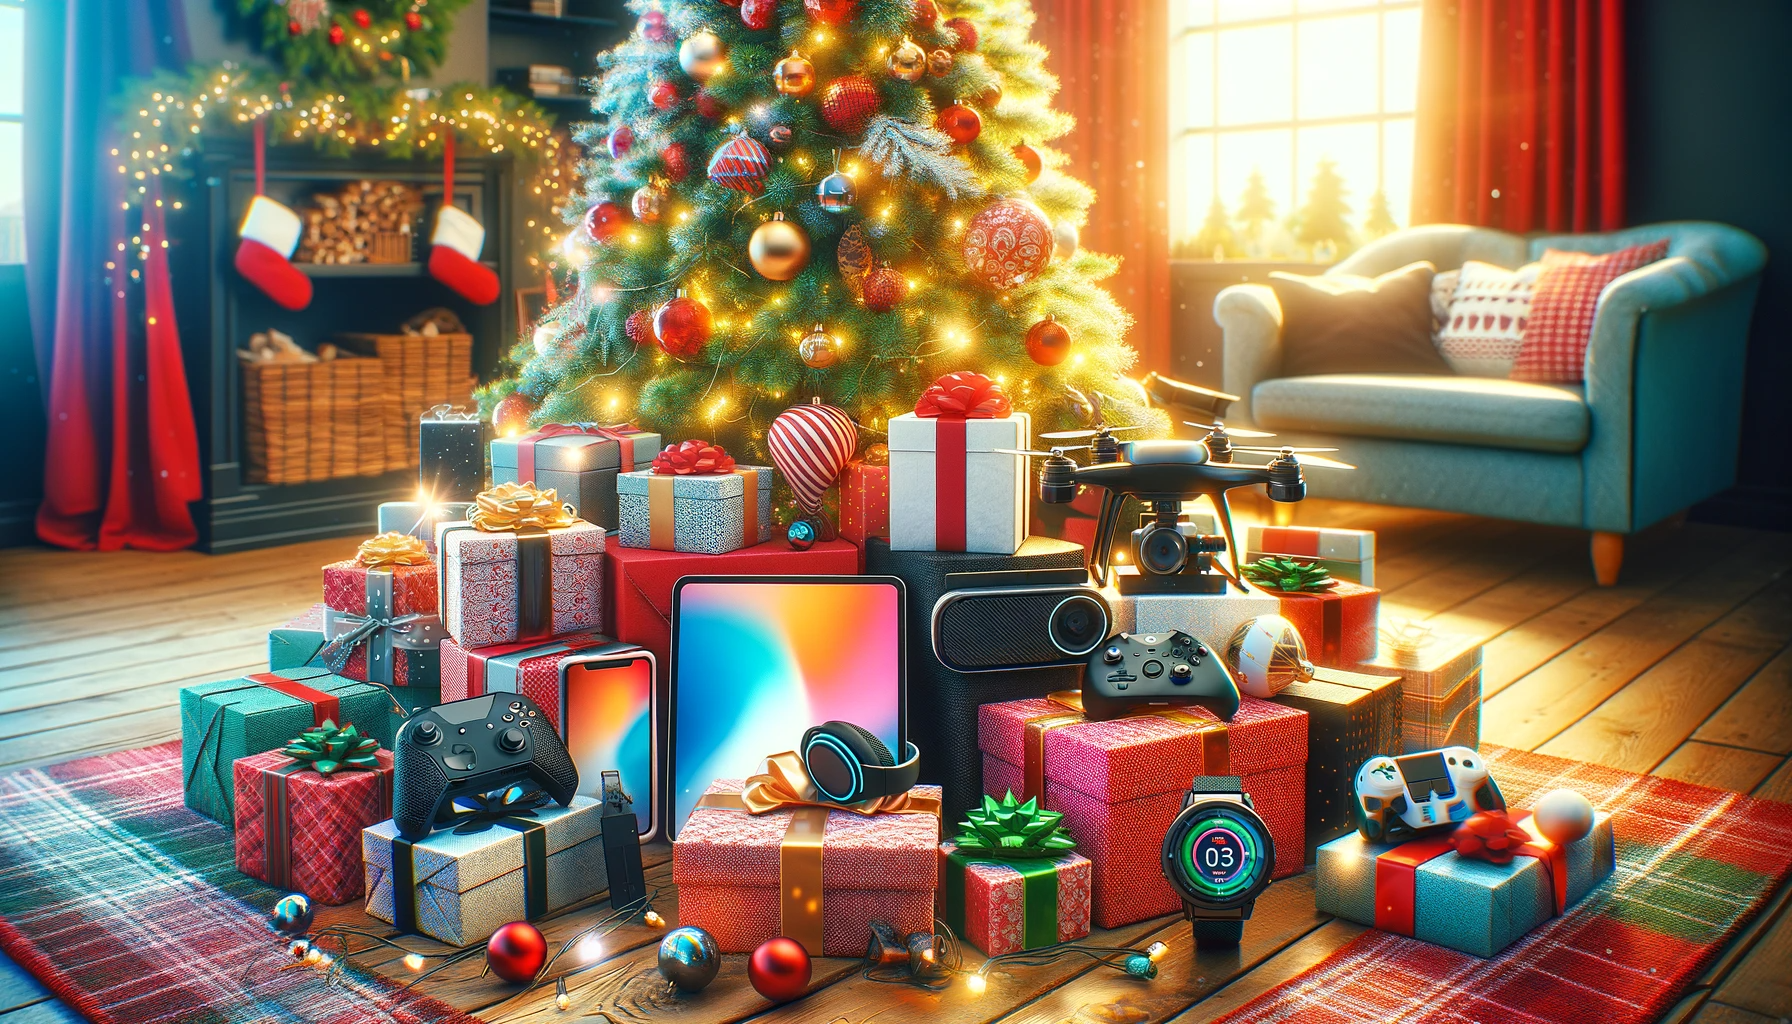 Ultimate Geek Christmas Gift Guide: Perfect Presents for Tech Lovers